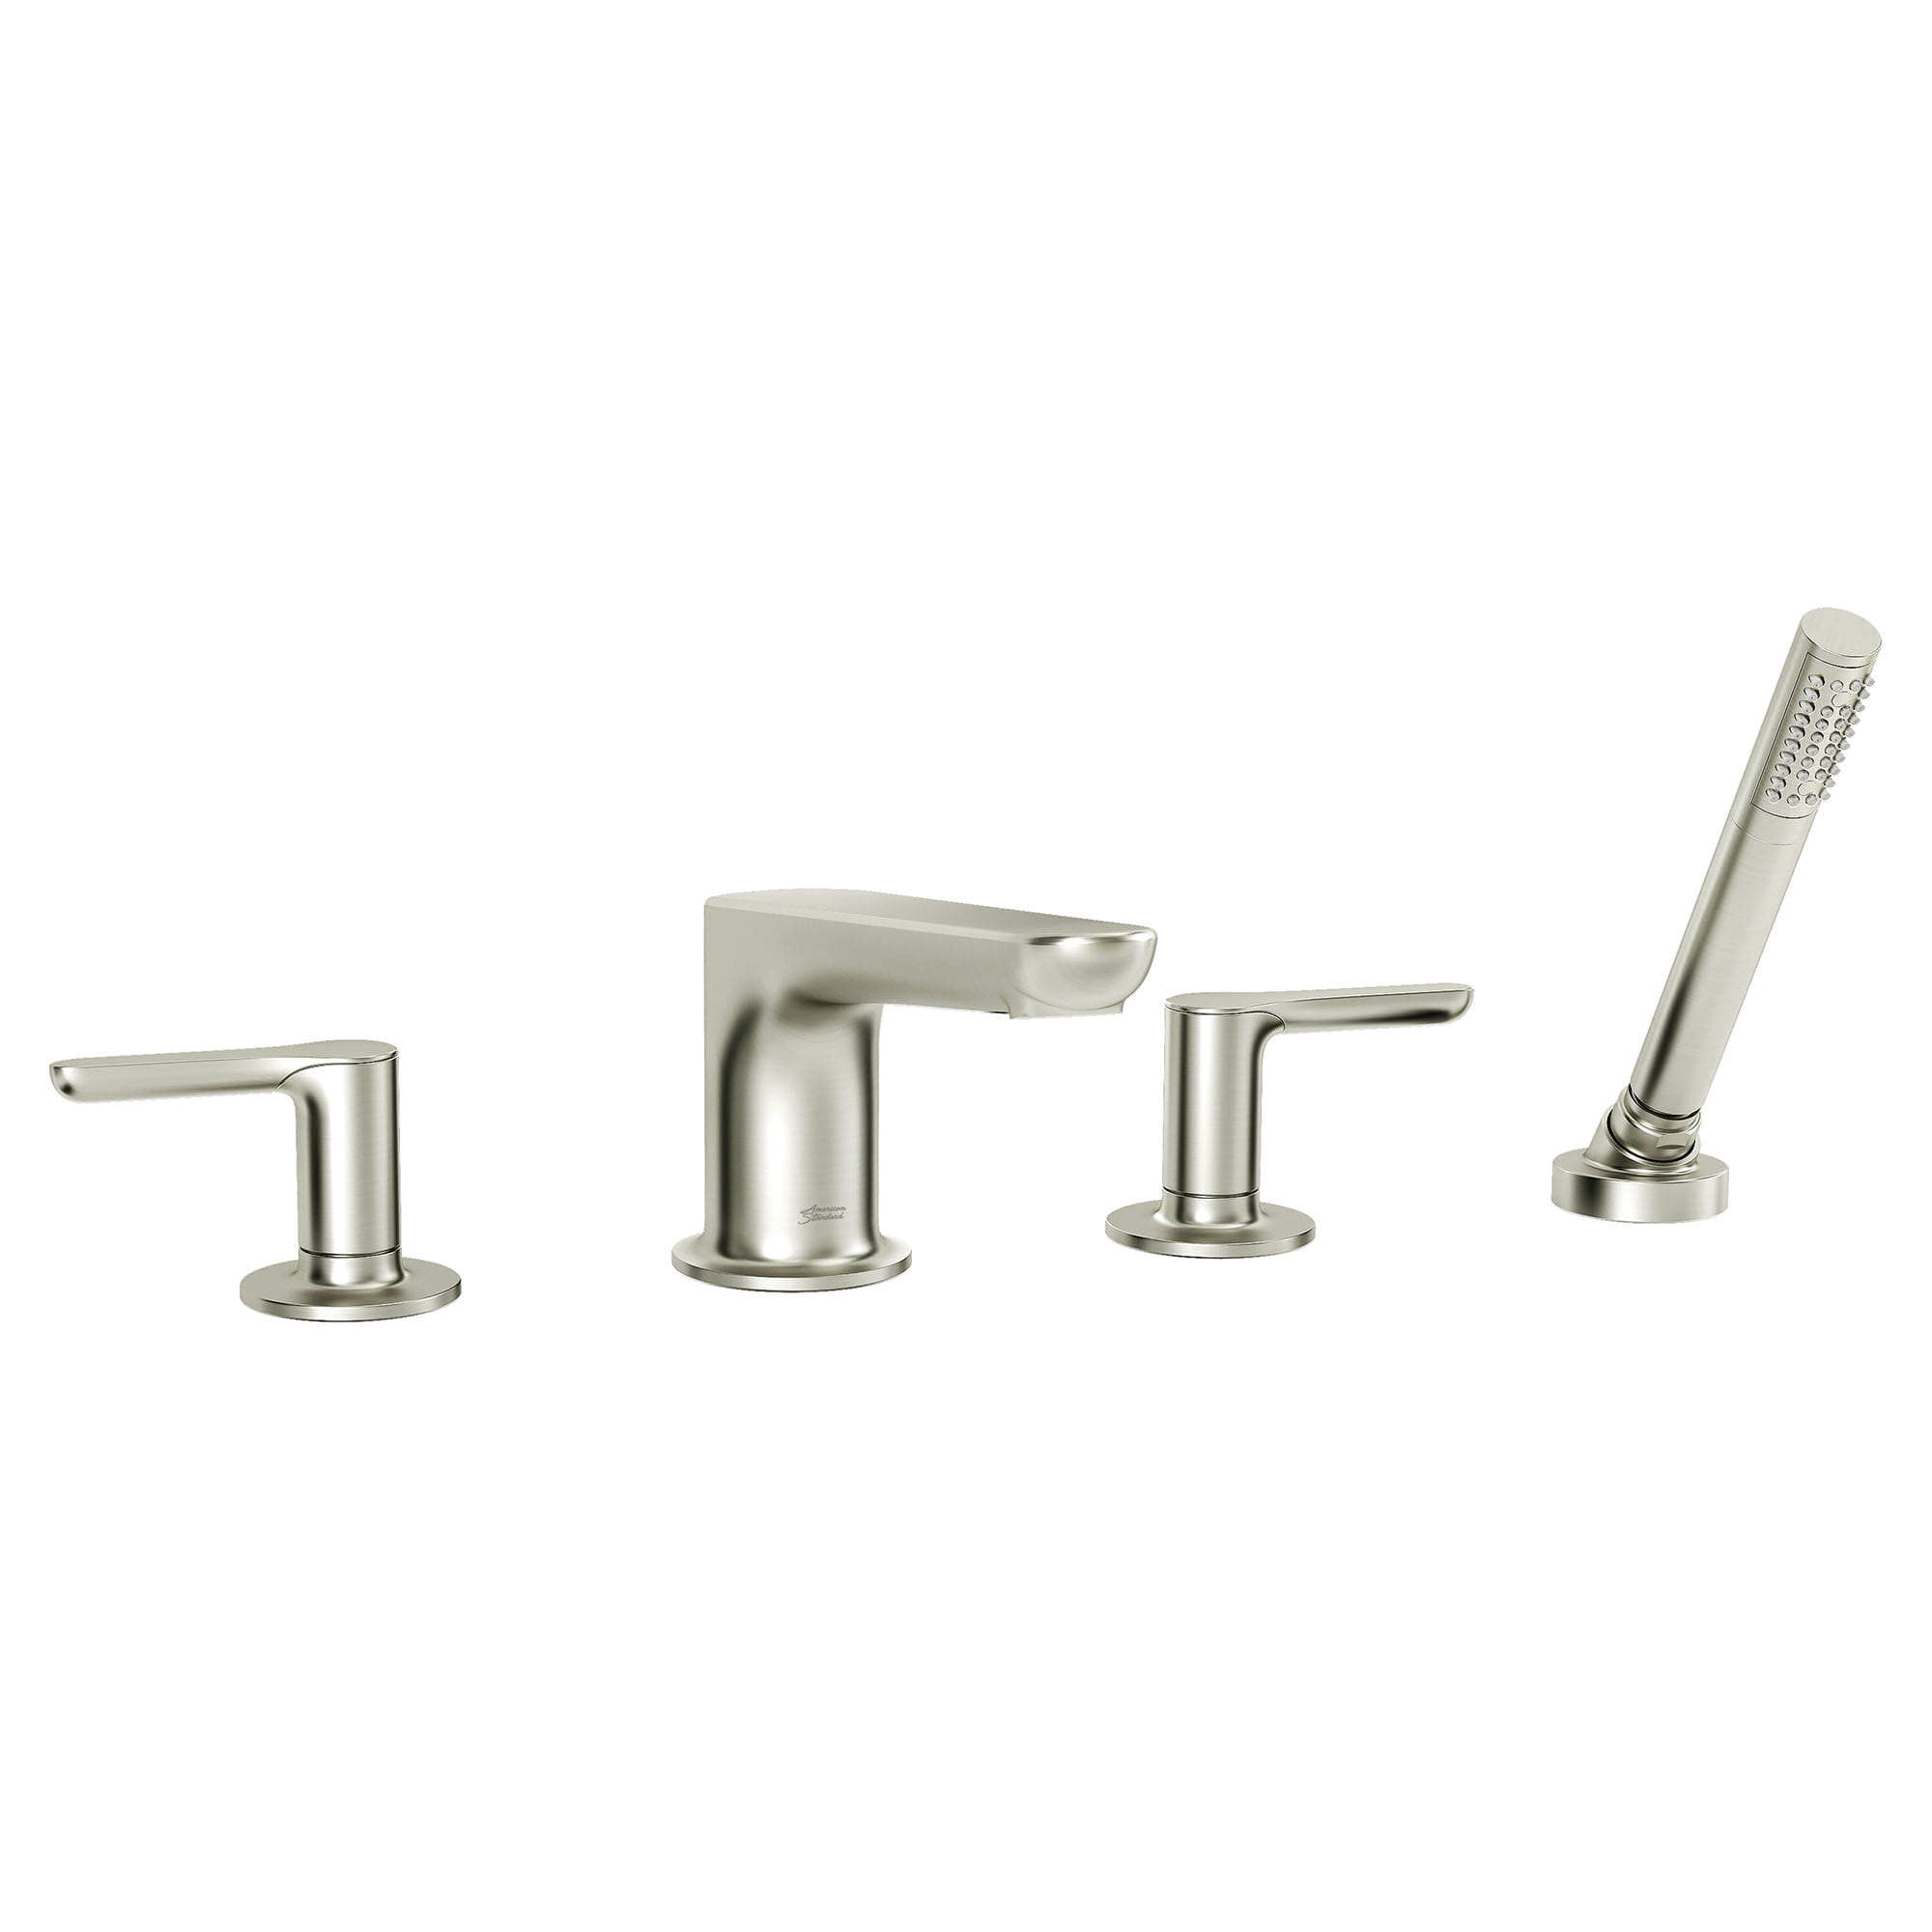 Studio S  Bathtub Faucet With Lever Handles and Personal Shower for Flash Rough In Valve   BRUSHED NICKEL